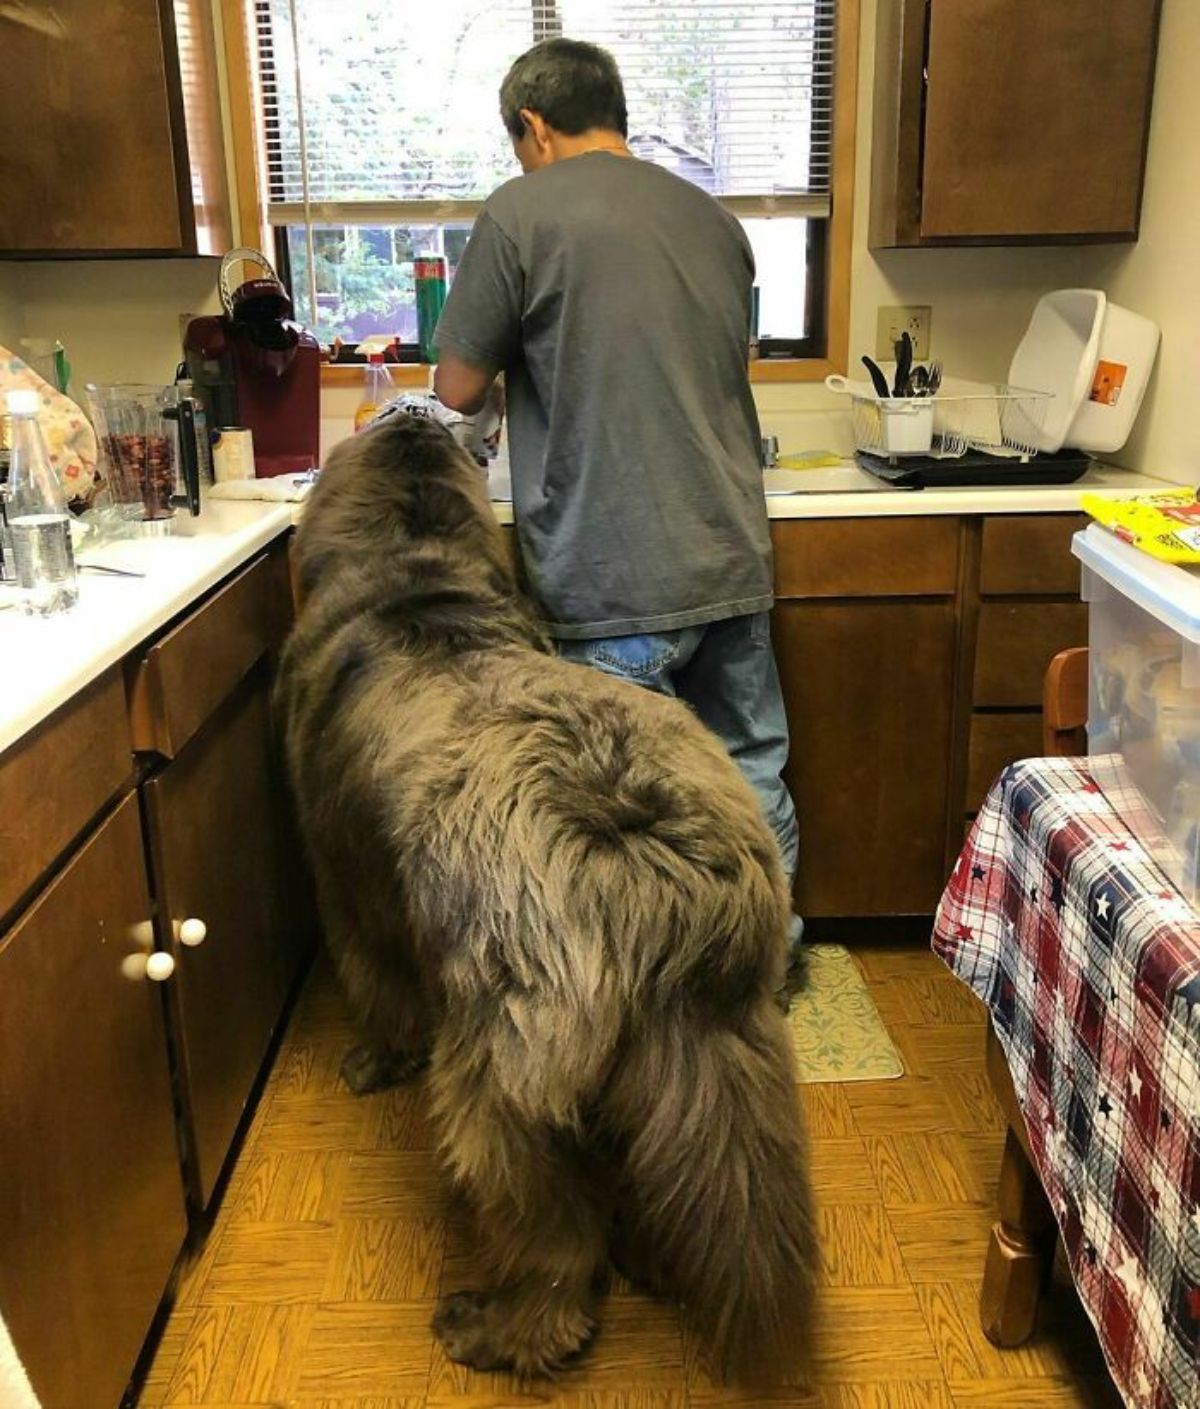 large fluffy brown and black dog standing next to a man at a kitchen counter